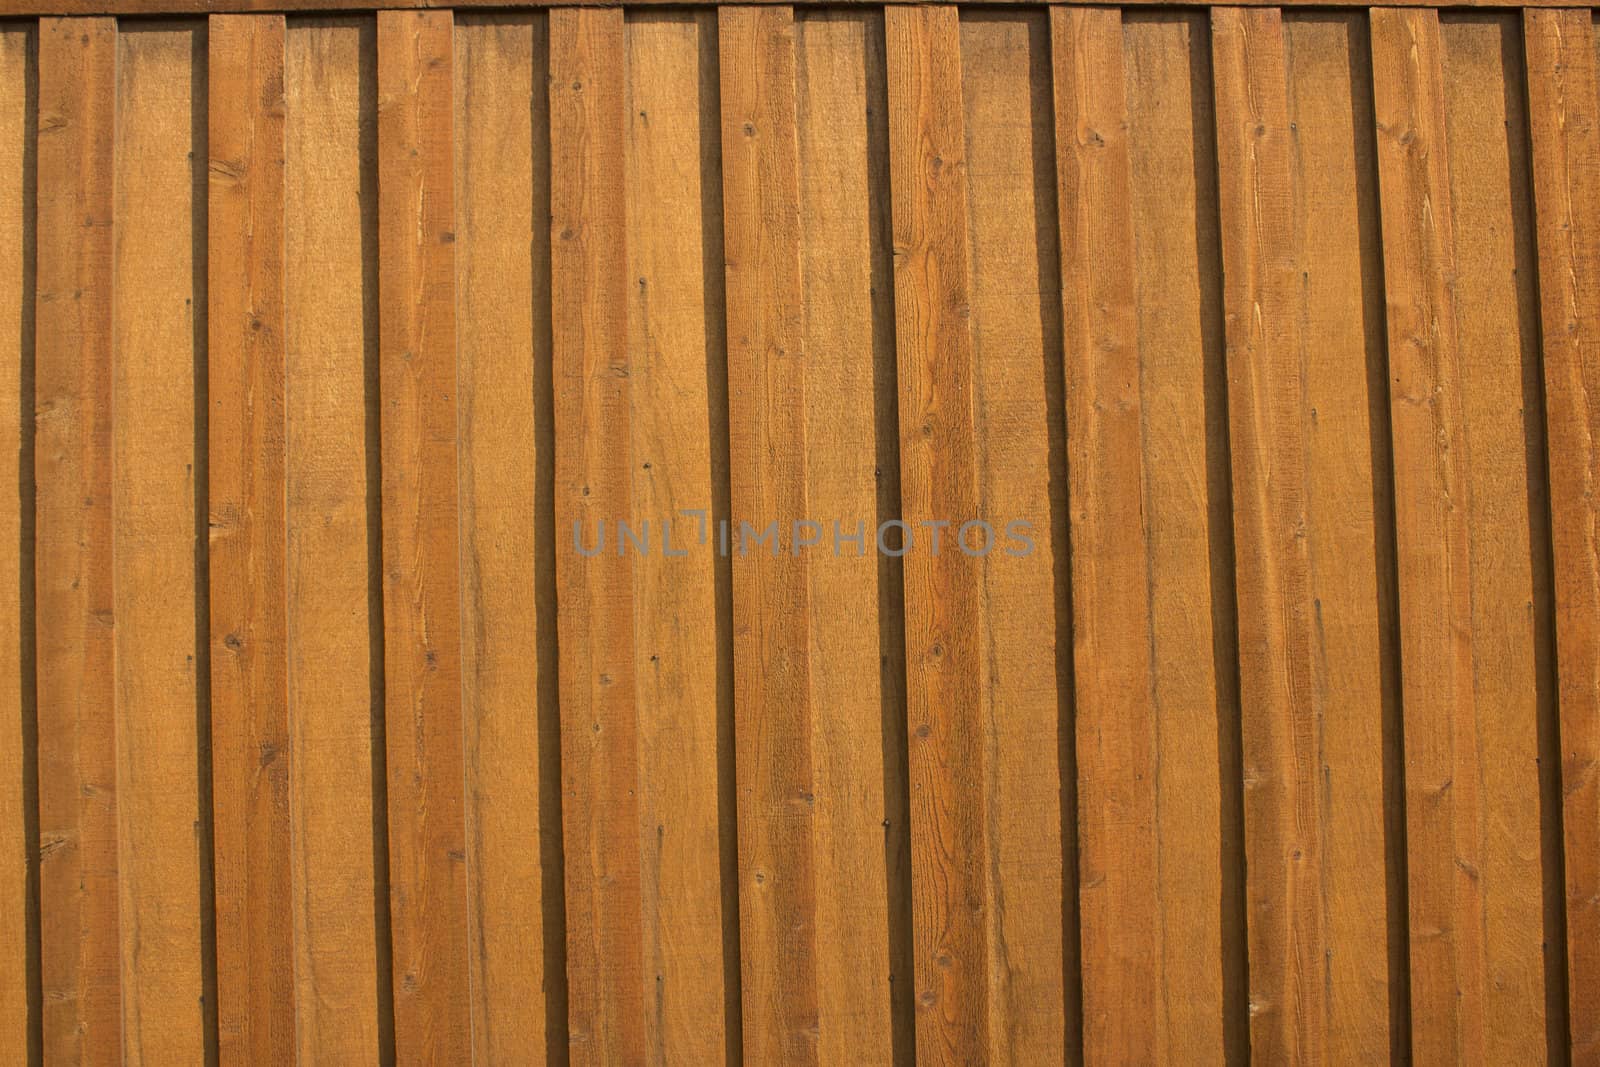 slated stained pine wood background or texture